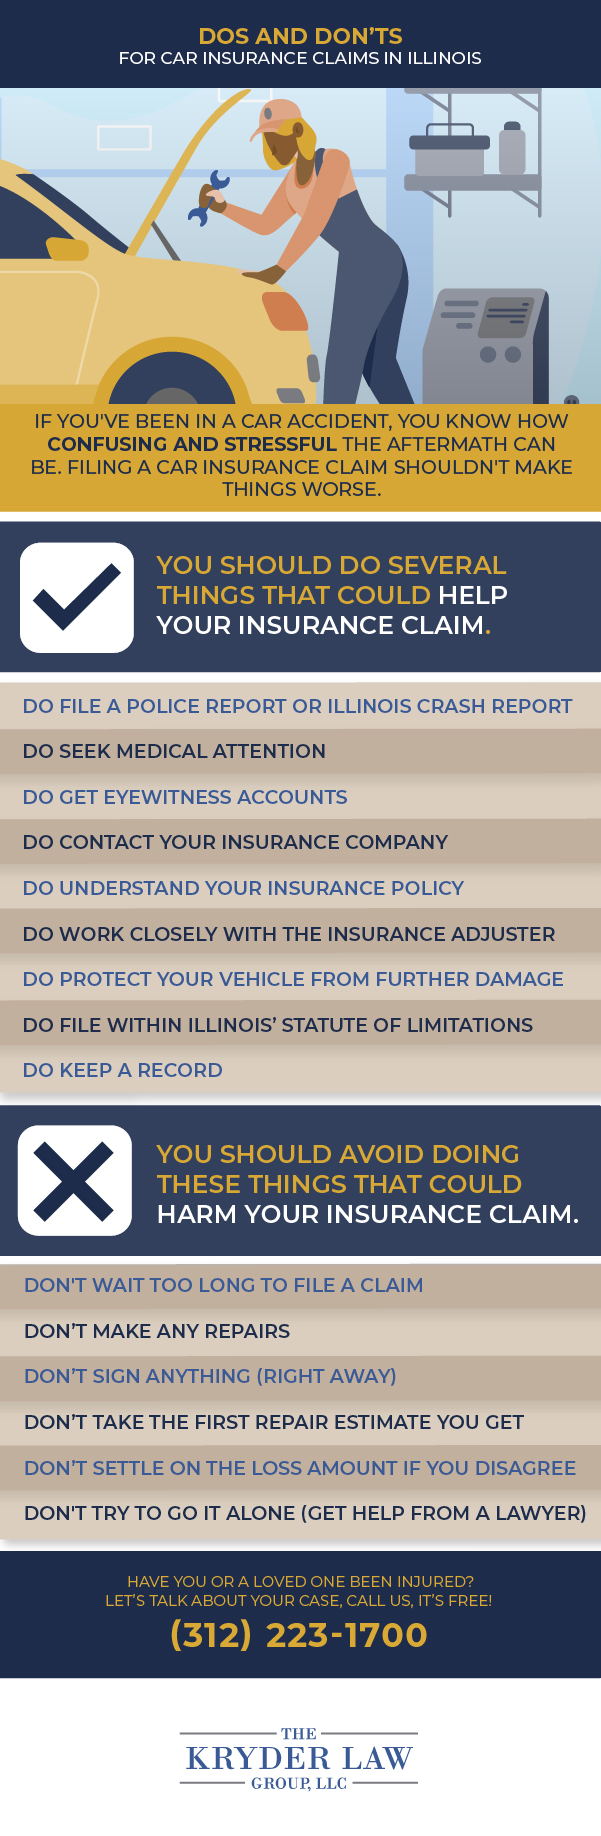 Do's and Don'ts for Car Insurance Claims in Illinois Infographic